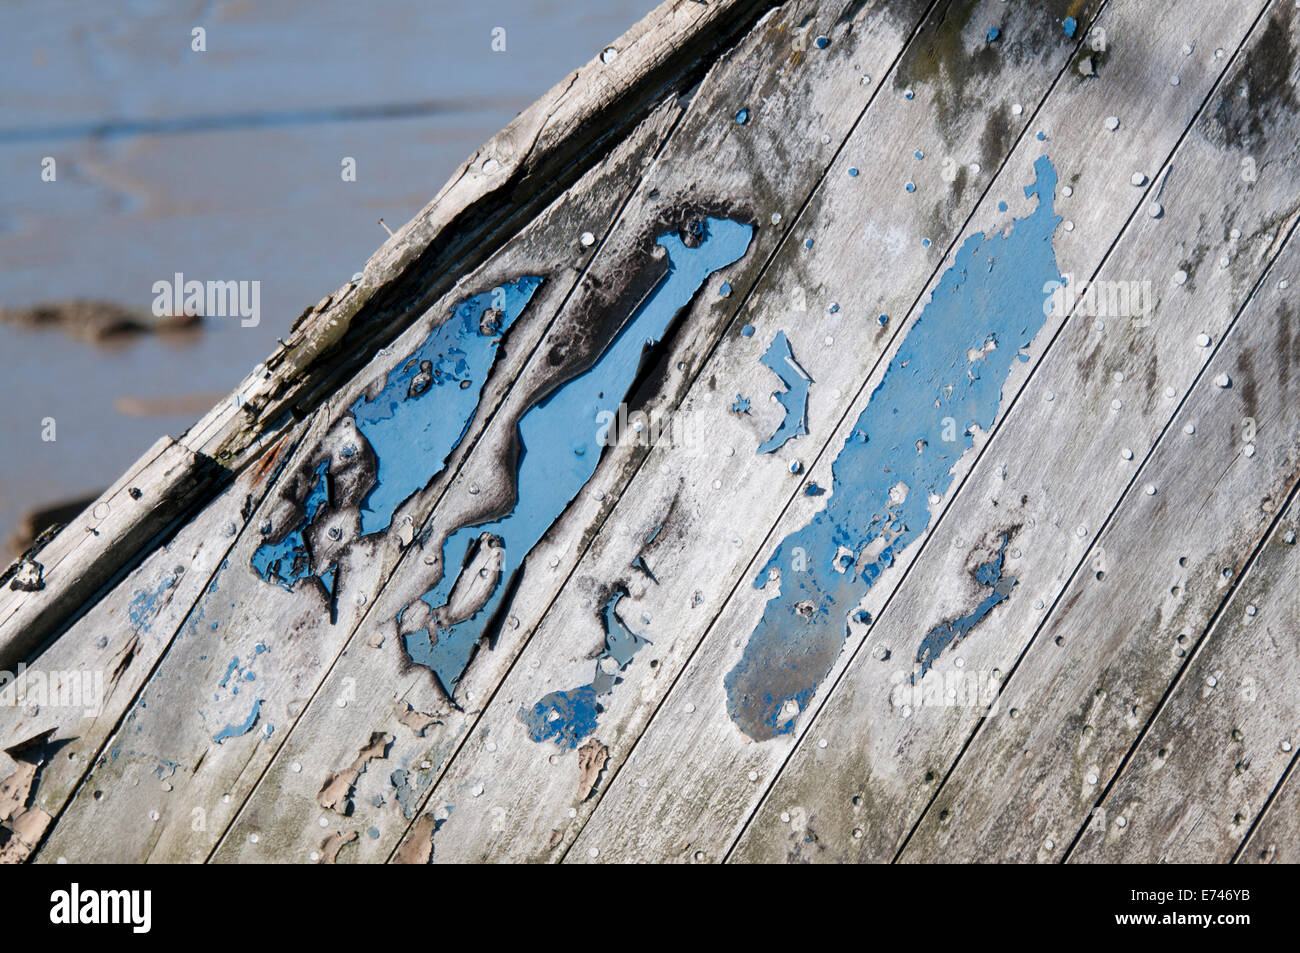 A close up shot of an old wooden boat with peeling blue paint Stock Photo